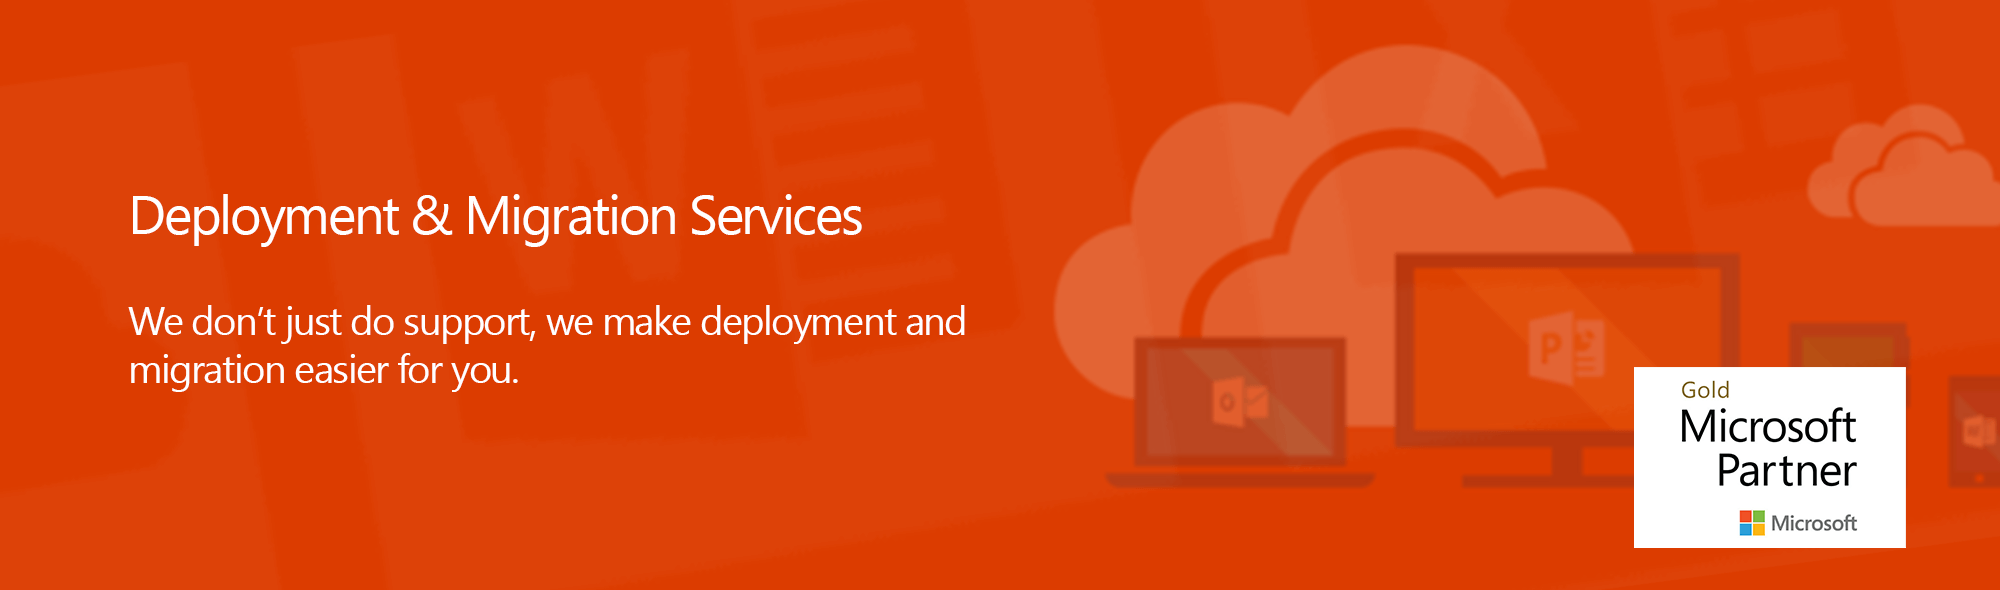 Deployment & Migration Services We don't just do support, we make deployment and migration easier for you